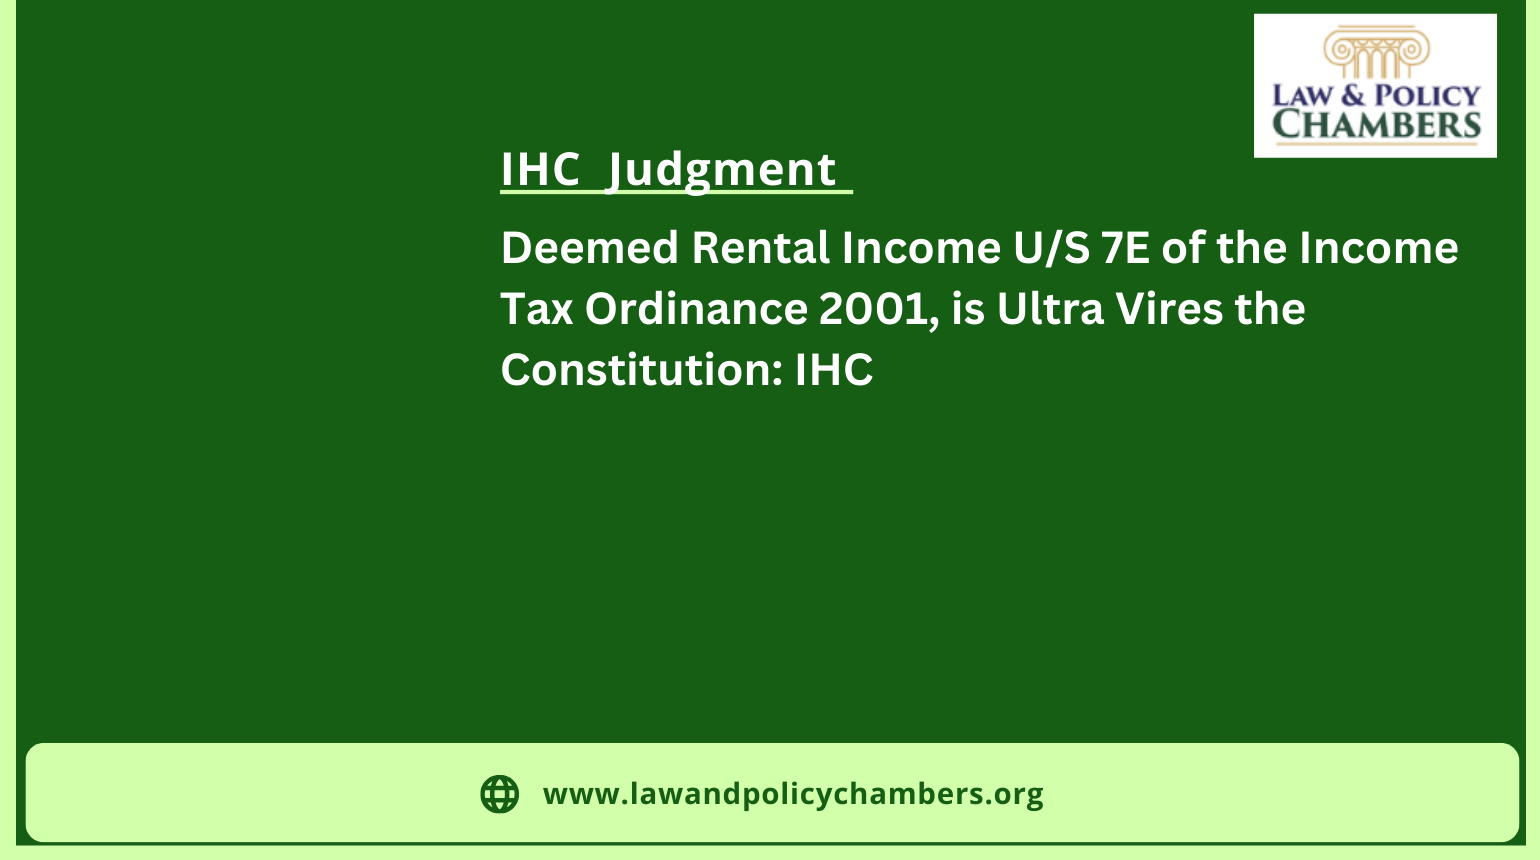 Deemed Rental Income U/S 7E of the Income Tax Ordinance 2001, is Ultra Vires the Constitution: IHC